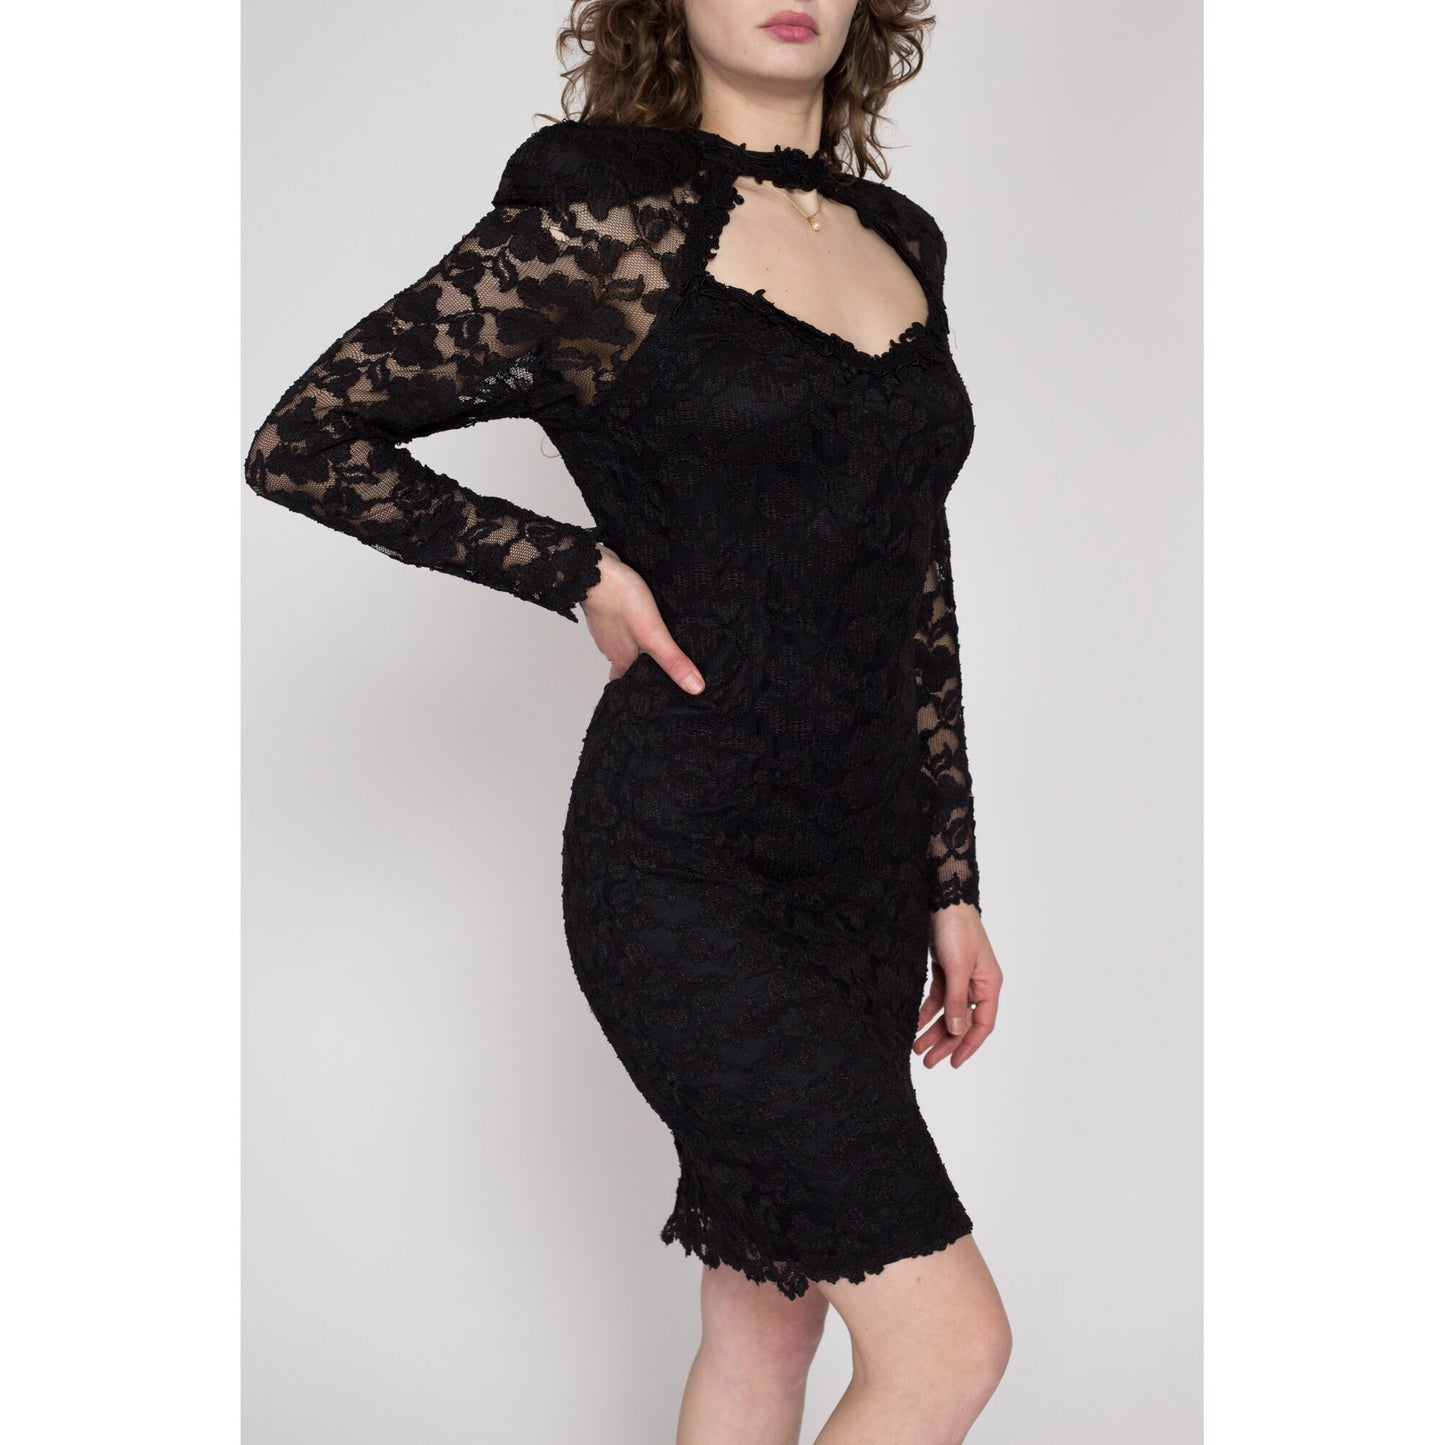 Medium 80s Black Lace Choker Party Dress | Vintage Keyhole Back Sexy Fitted Mini Cocktail Dress